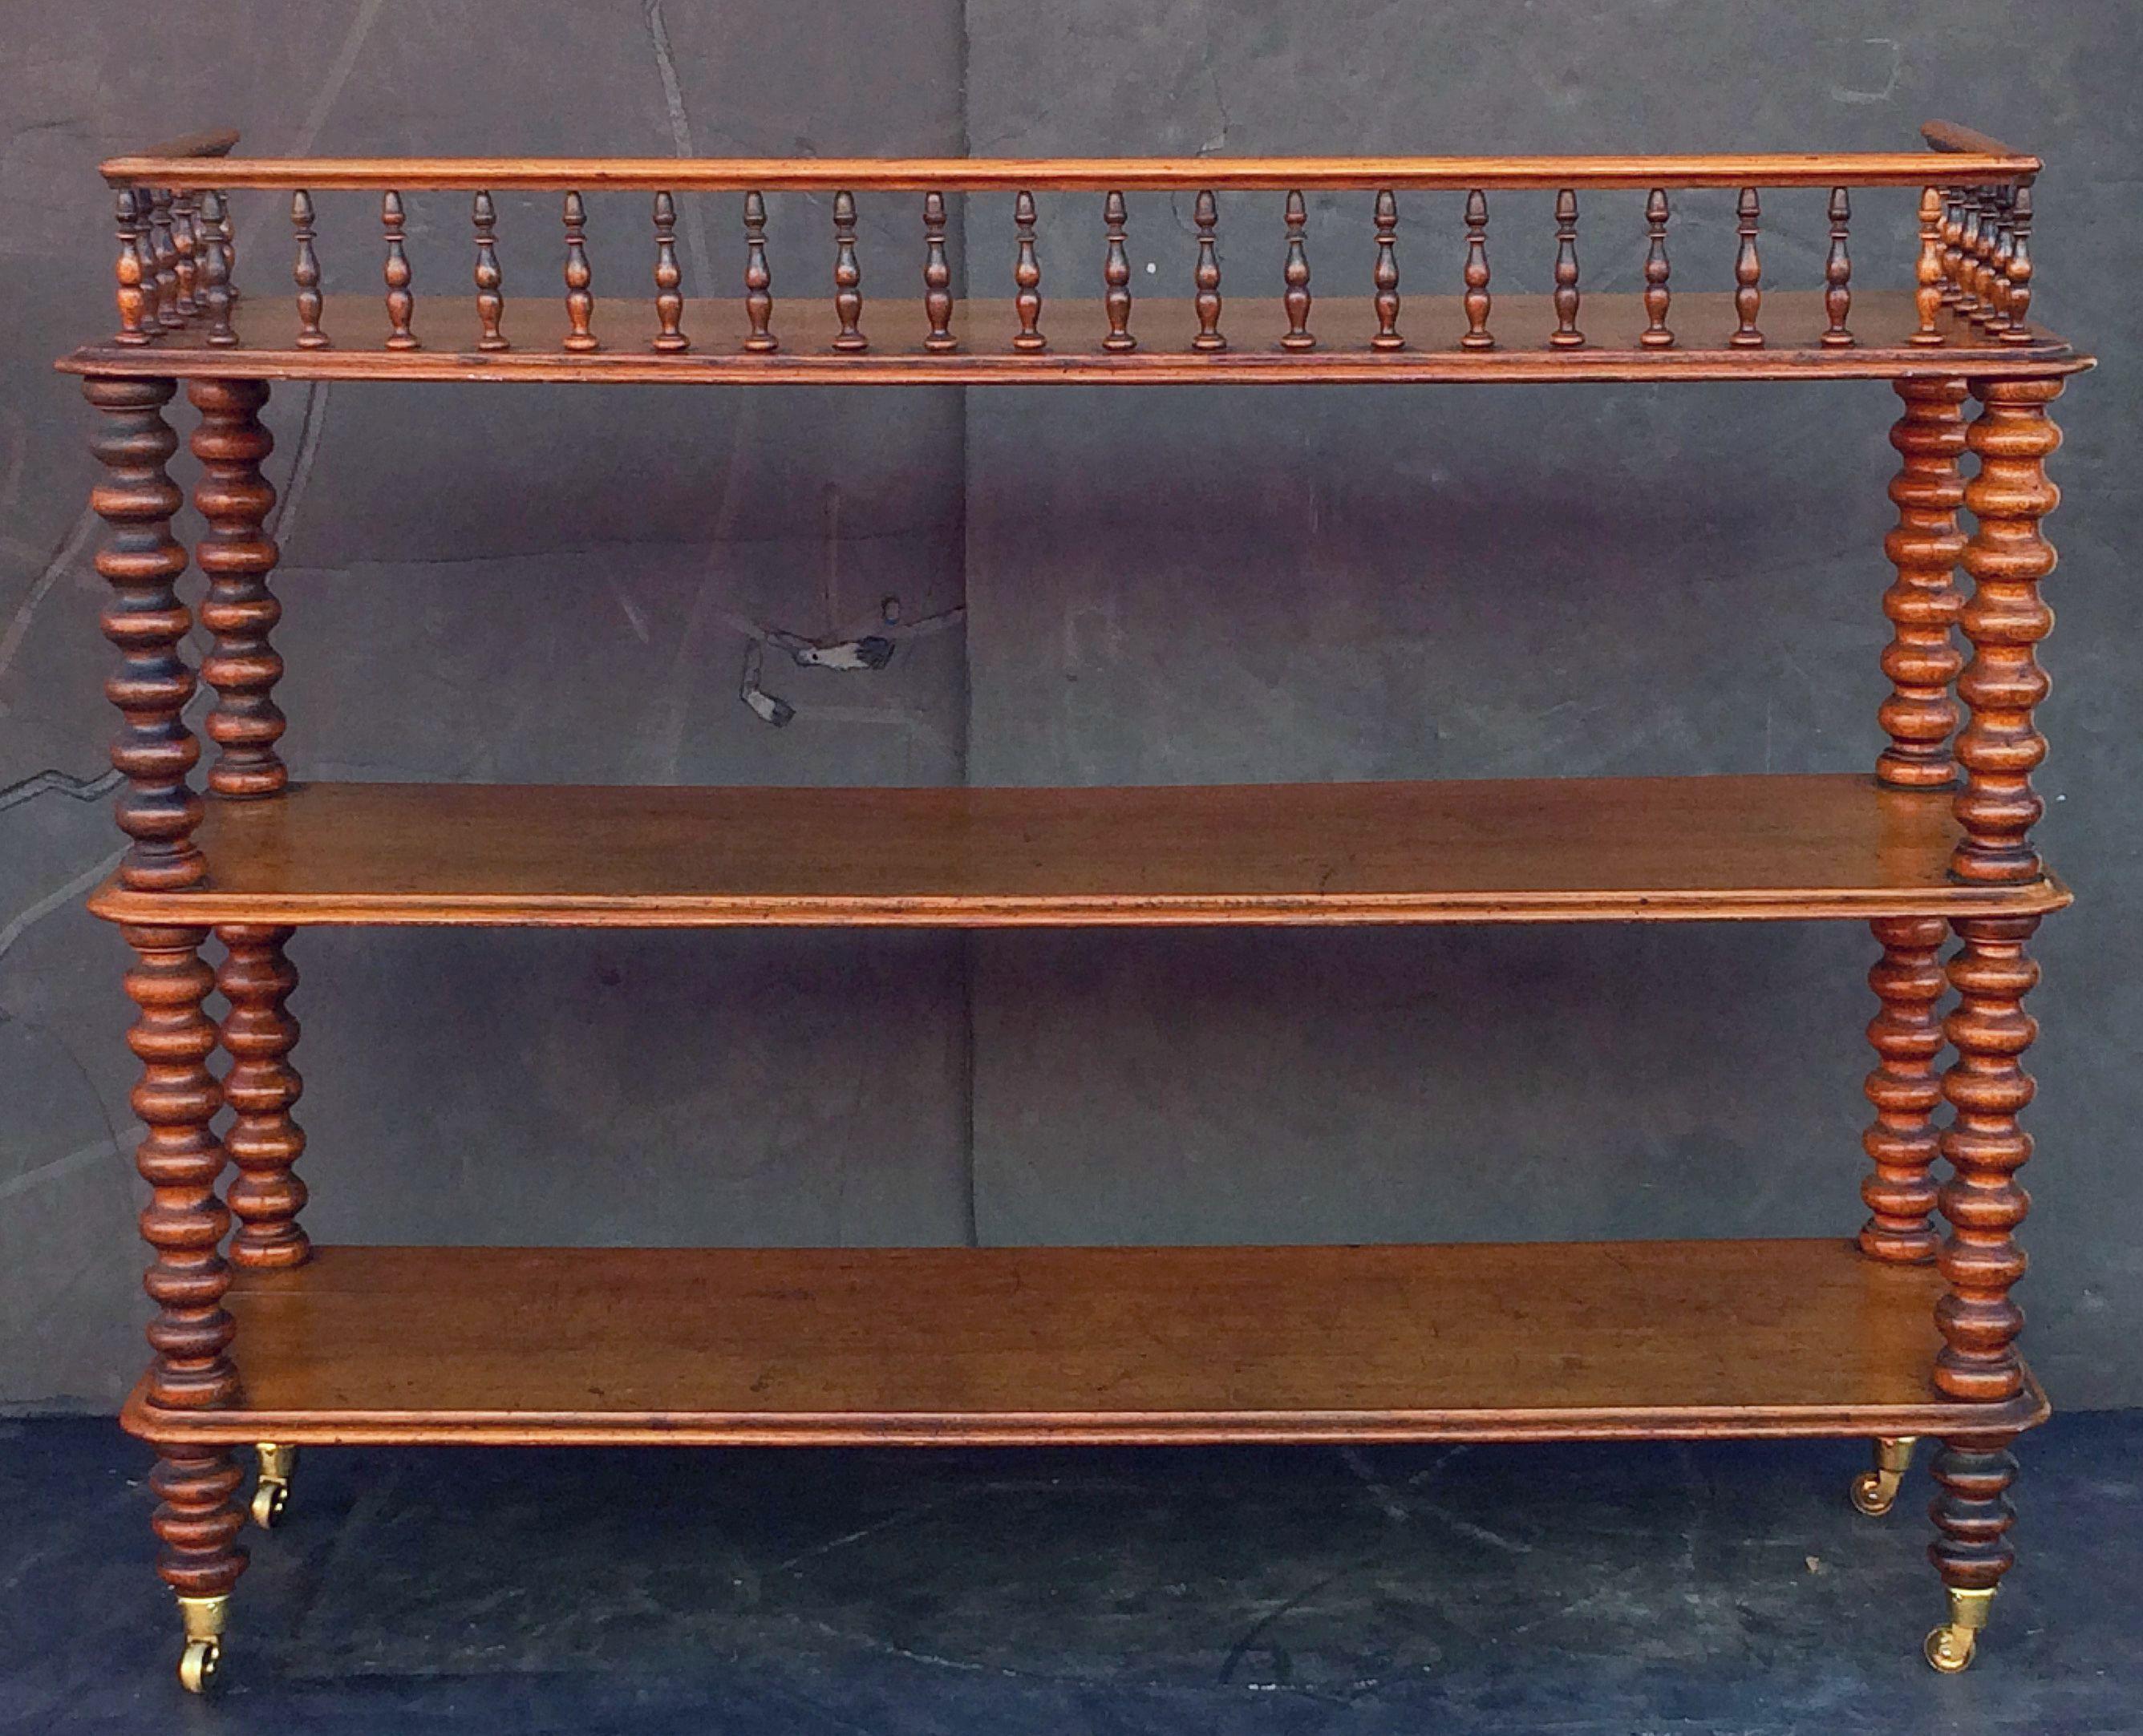 A fine English trolley console server of oak, featuring three tiers with edge-moulded tops, the top tier with back gallery frieze of turned spindles with railing, each tier adjoined to four bobbin turned column supports, set upon rolling brass